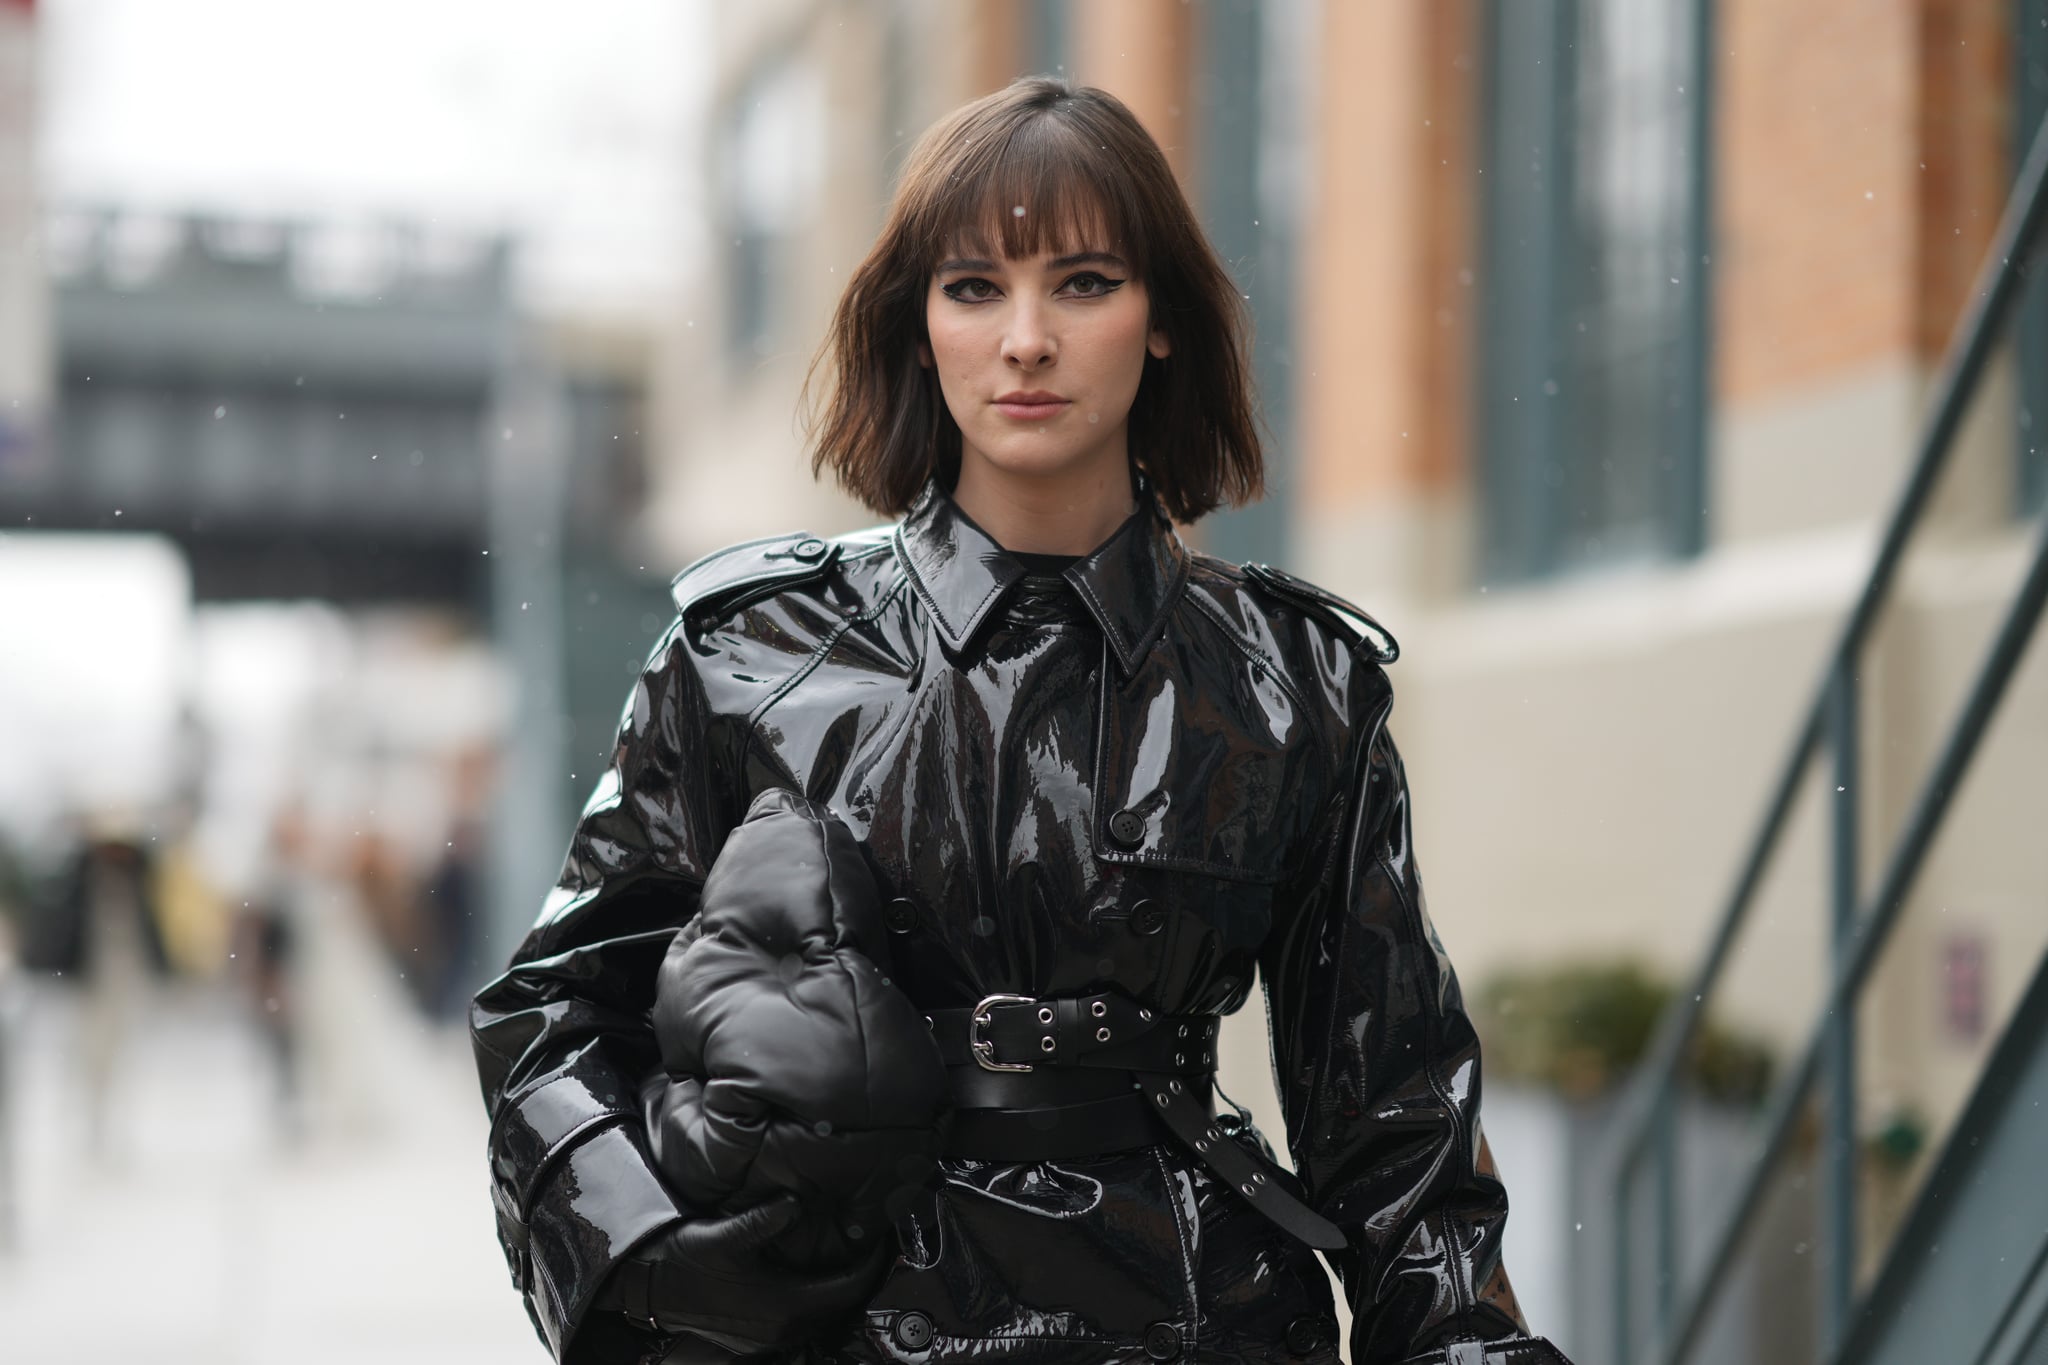  Hari Nef wears a black high neck pullover, a black shiny vinyl belted long trench coat, a black matte puffy leather handbag from Bottega Veneta, a black shiny leather nailed / studded belt, outside Khaite, during New York Fashion Week, on February 13, 2022 in New York City. (Photo by Edward Berthelot/Getty Images)